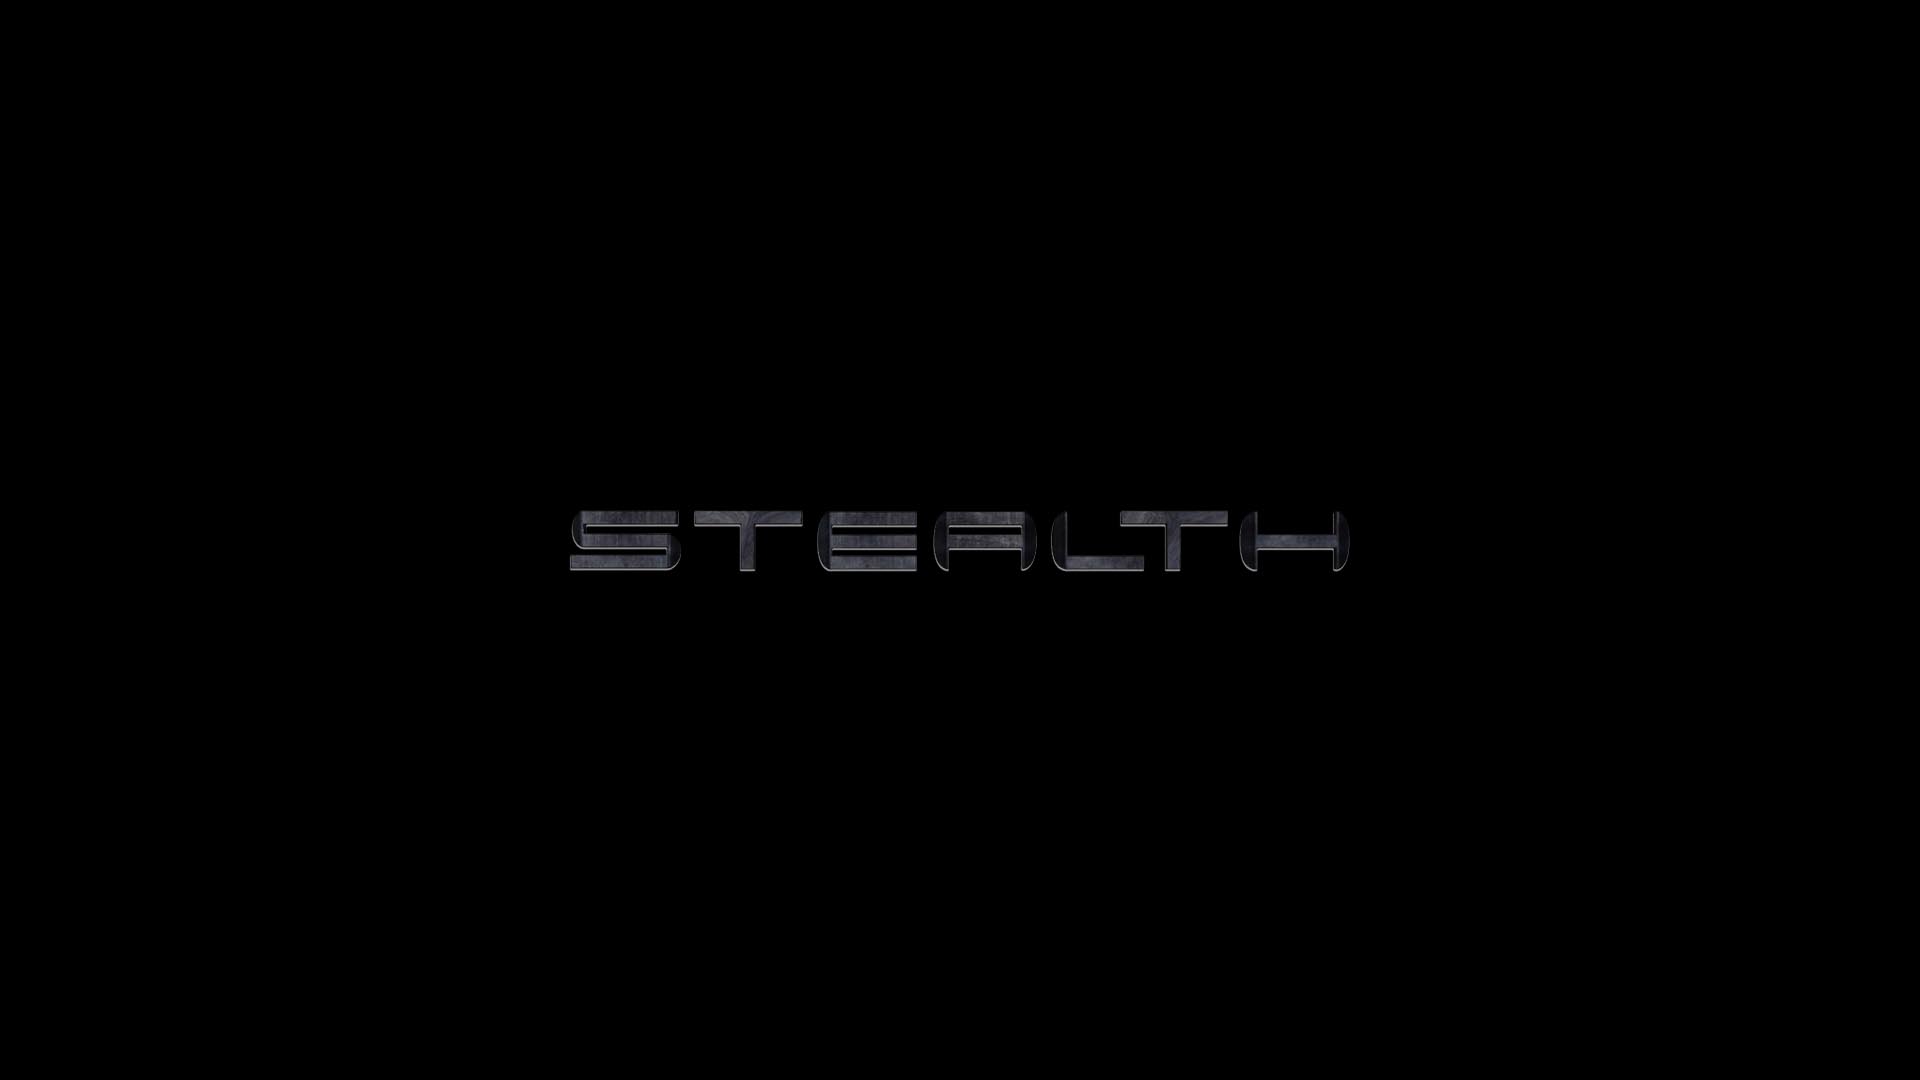 Stealth Wallpapers